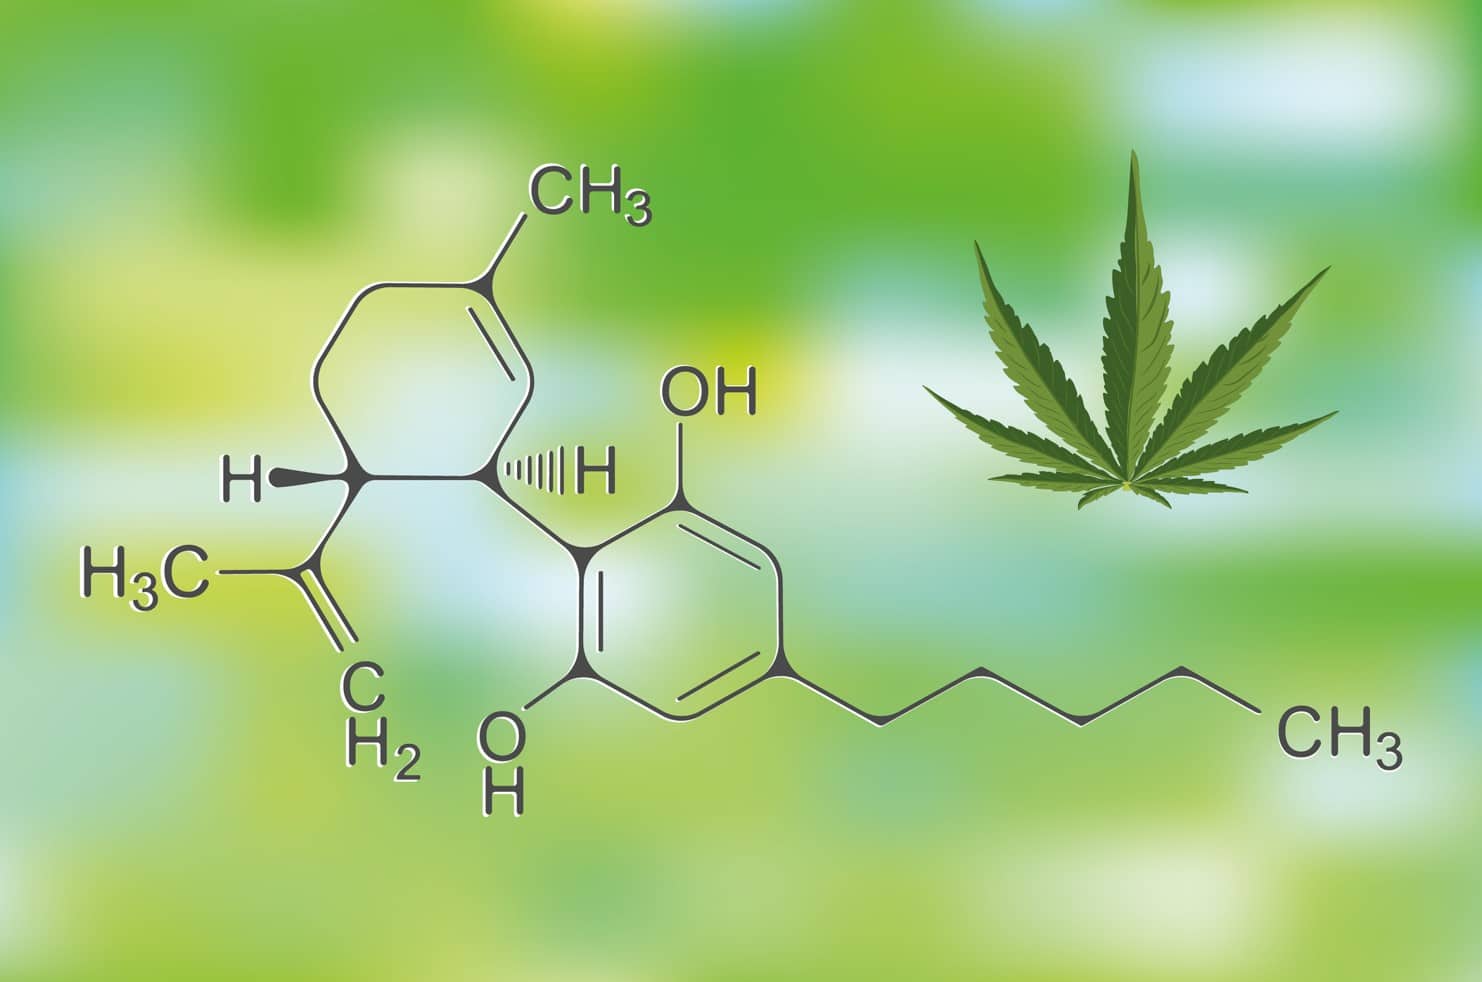 Curious about synthetic cannabinoids? Here's everything you need to know about these substances and how they compare to traditional cannabis.